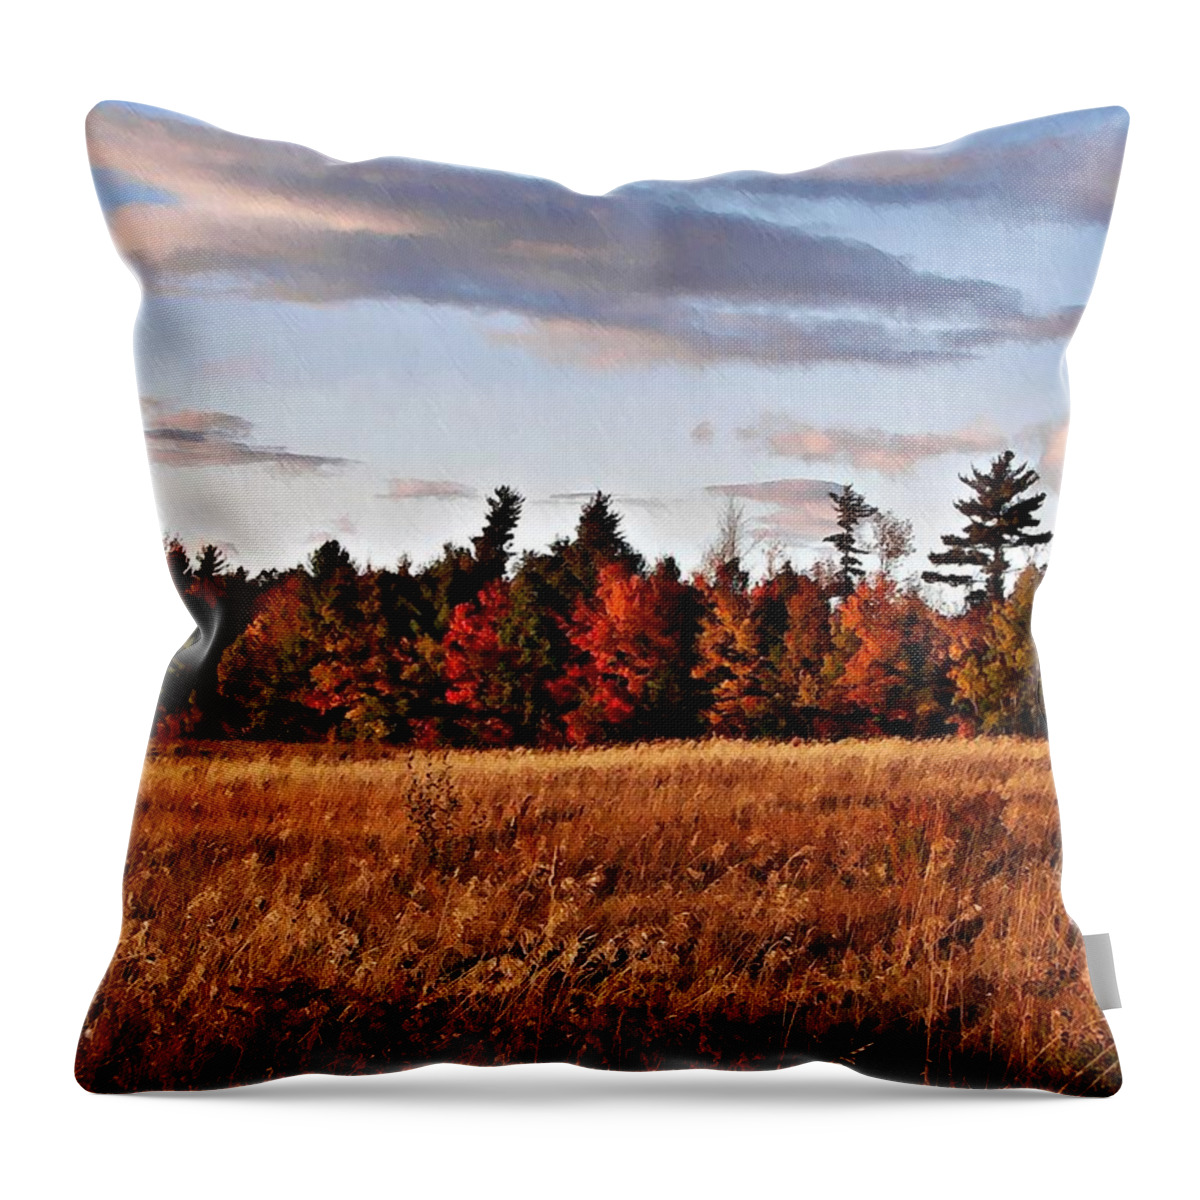 The Field At The Old Farm Throw Pillow featuring the photograph The Field At The Old Farm by Joy Nichols